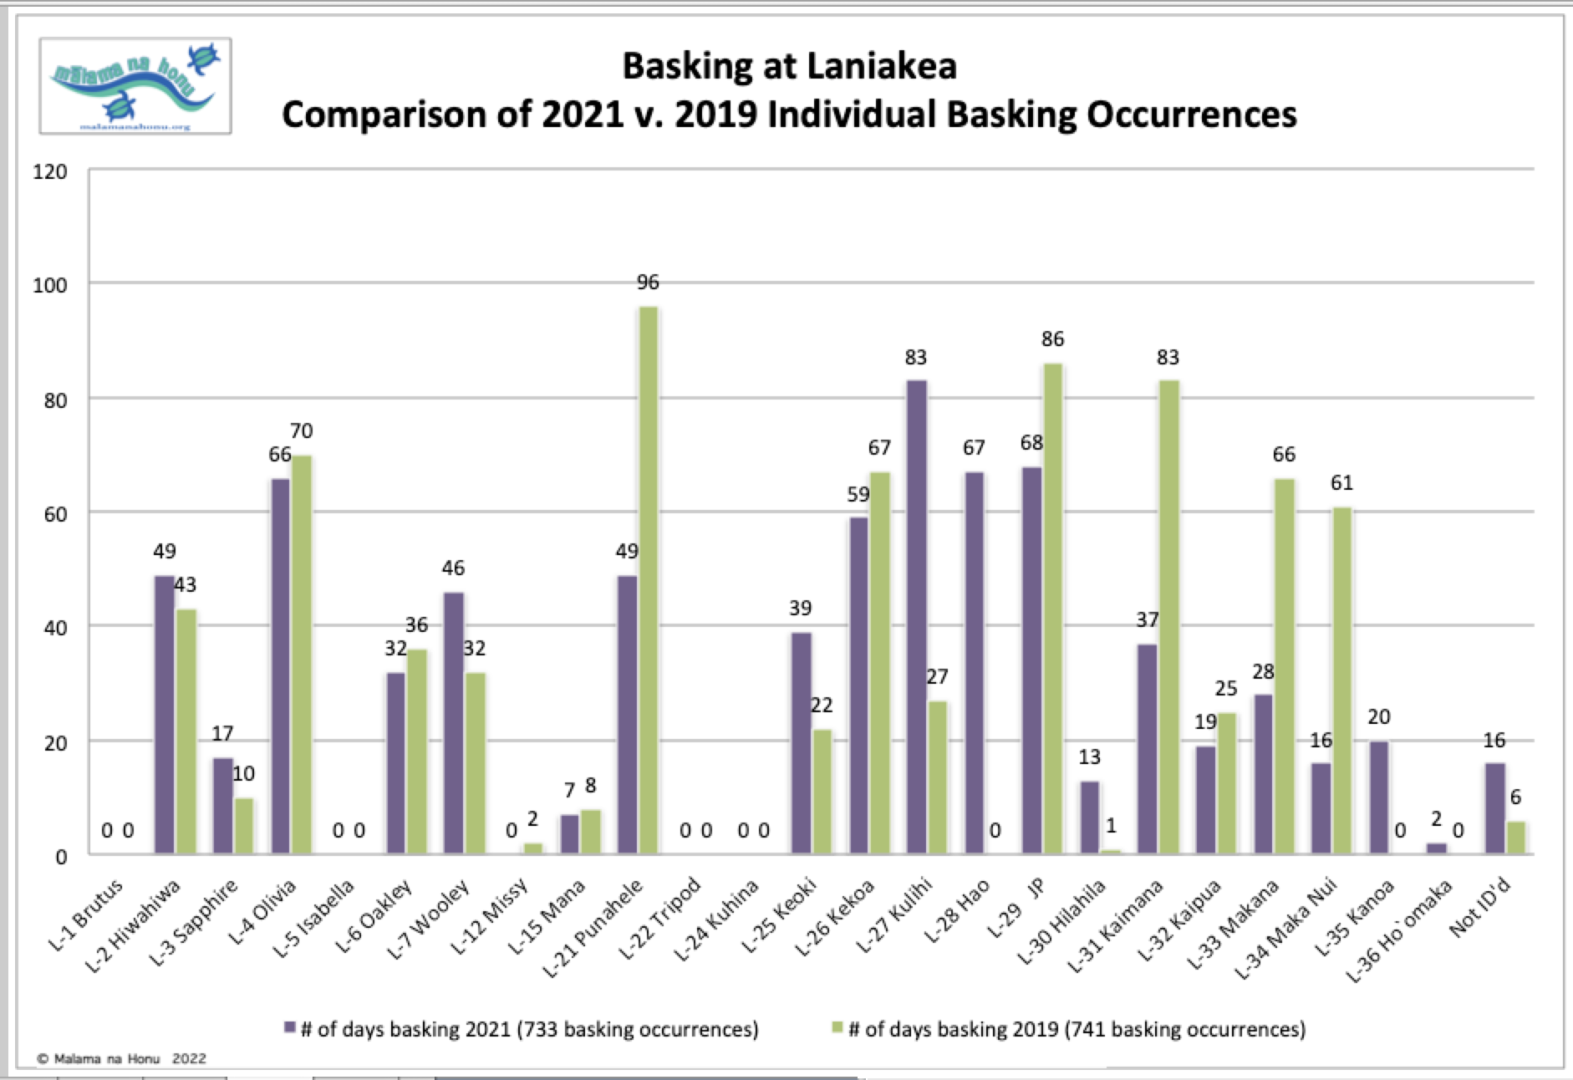 Bsaking at Laniakea Comparison of 2021 v 2019 Individual Basking Occurrences